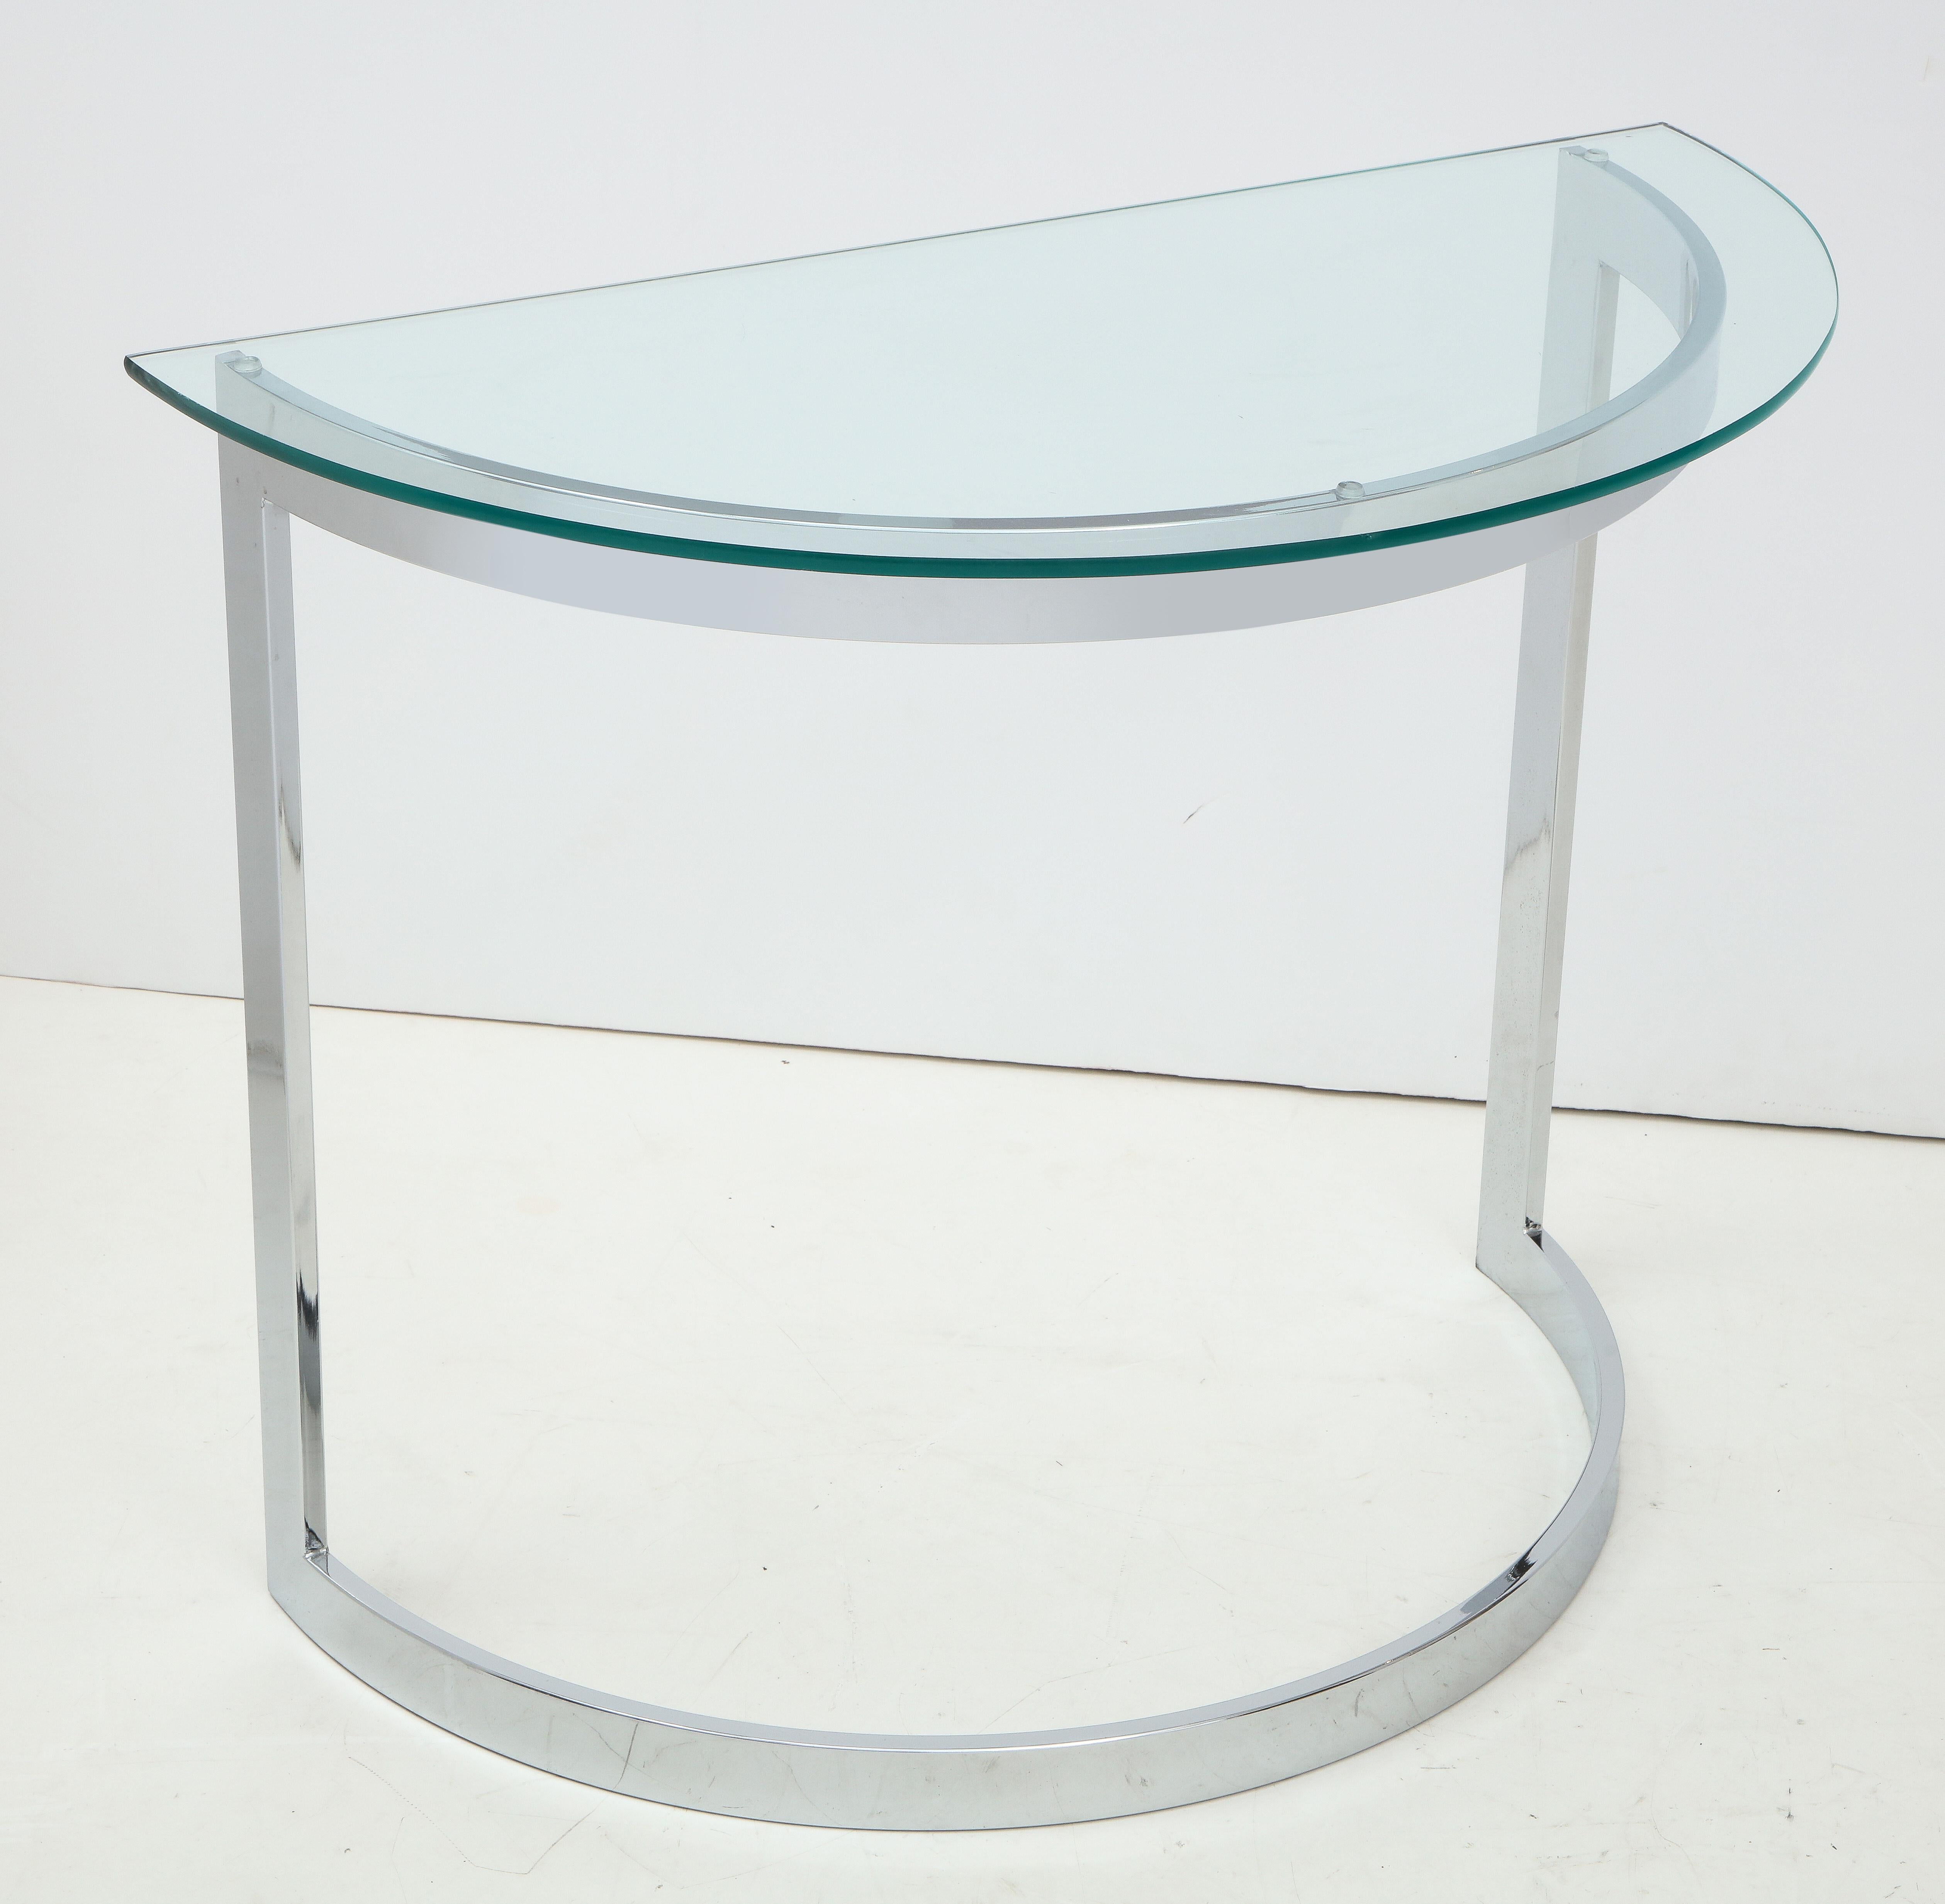 Chrome and glass demilune console table.
The glass top is 1/2